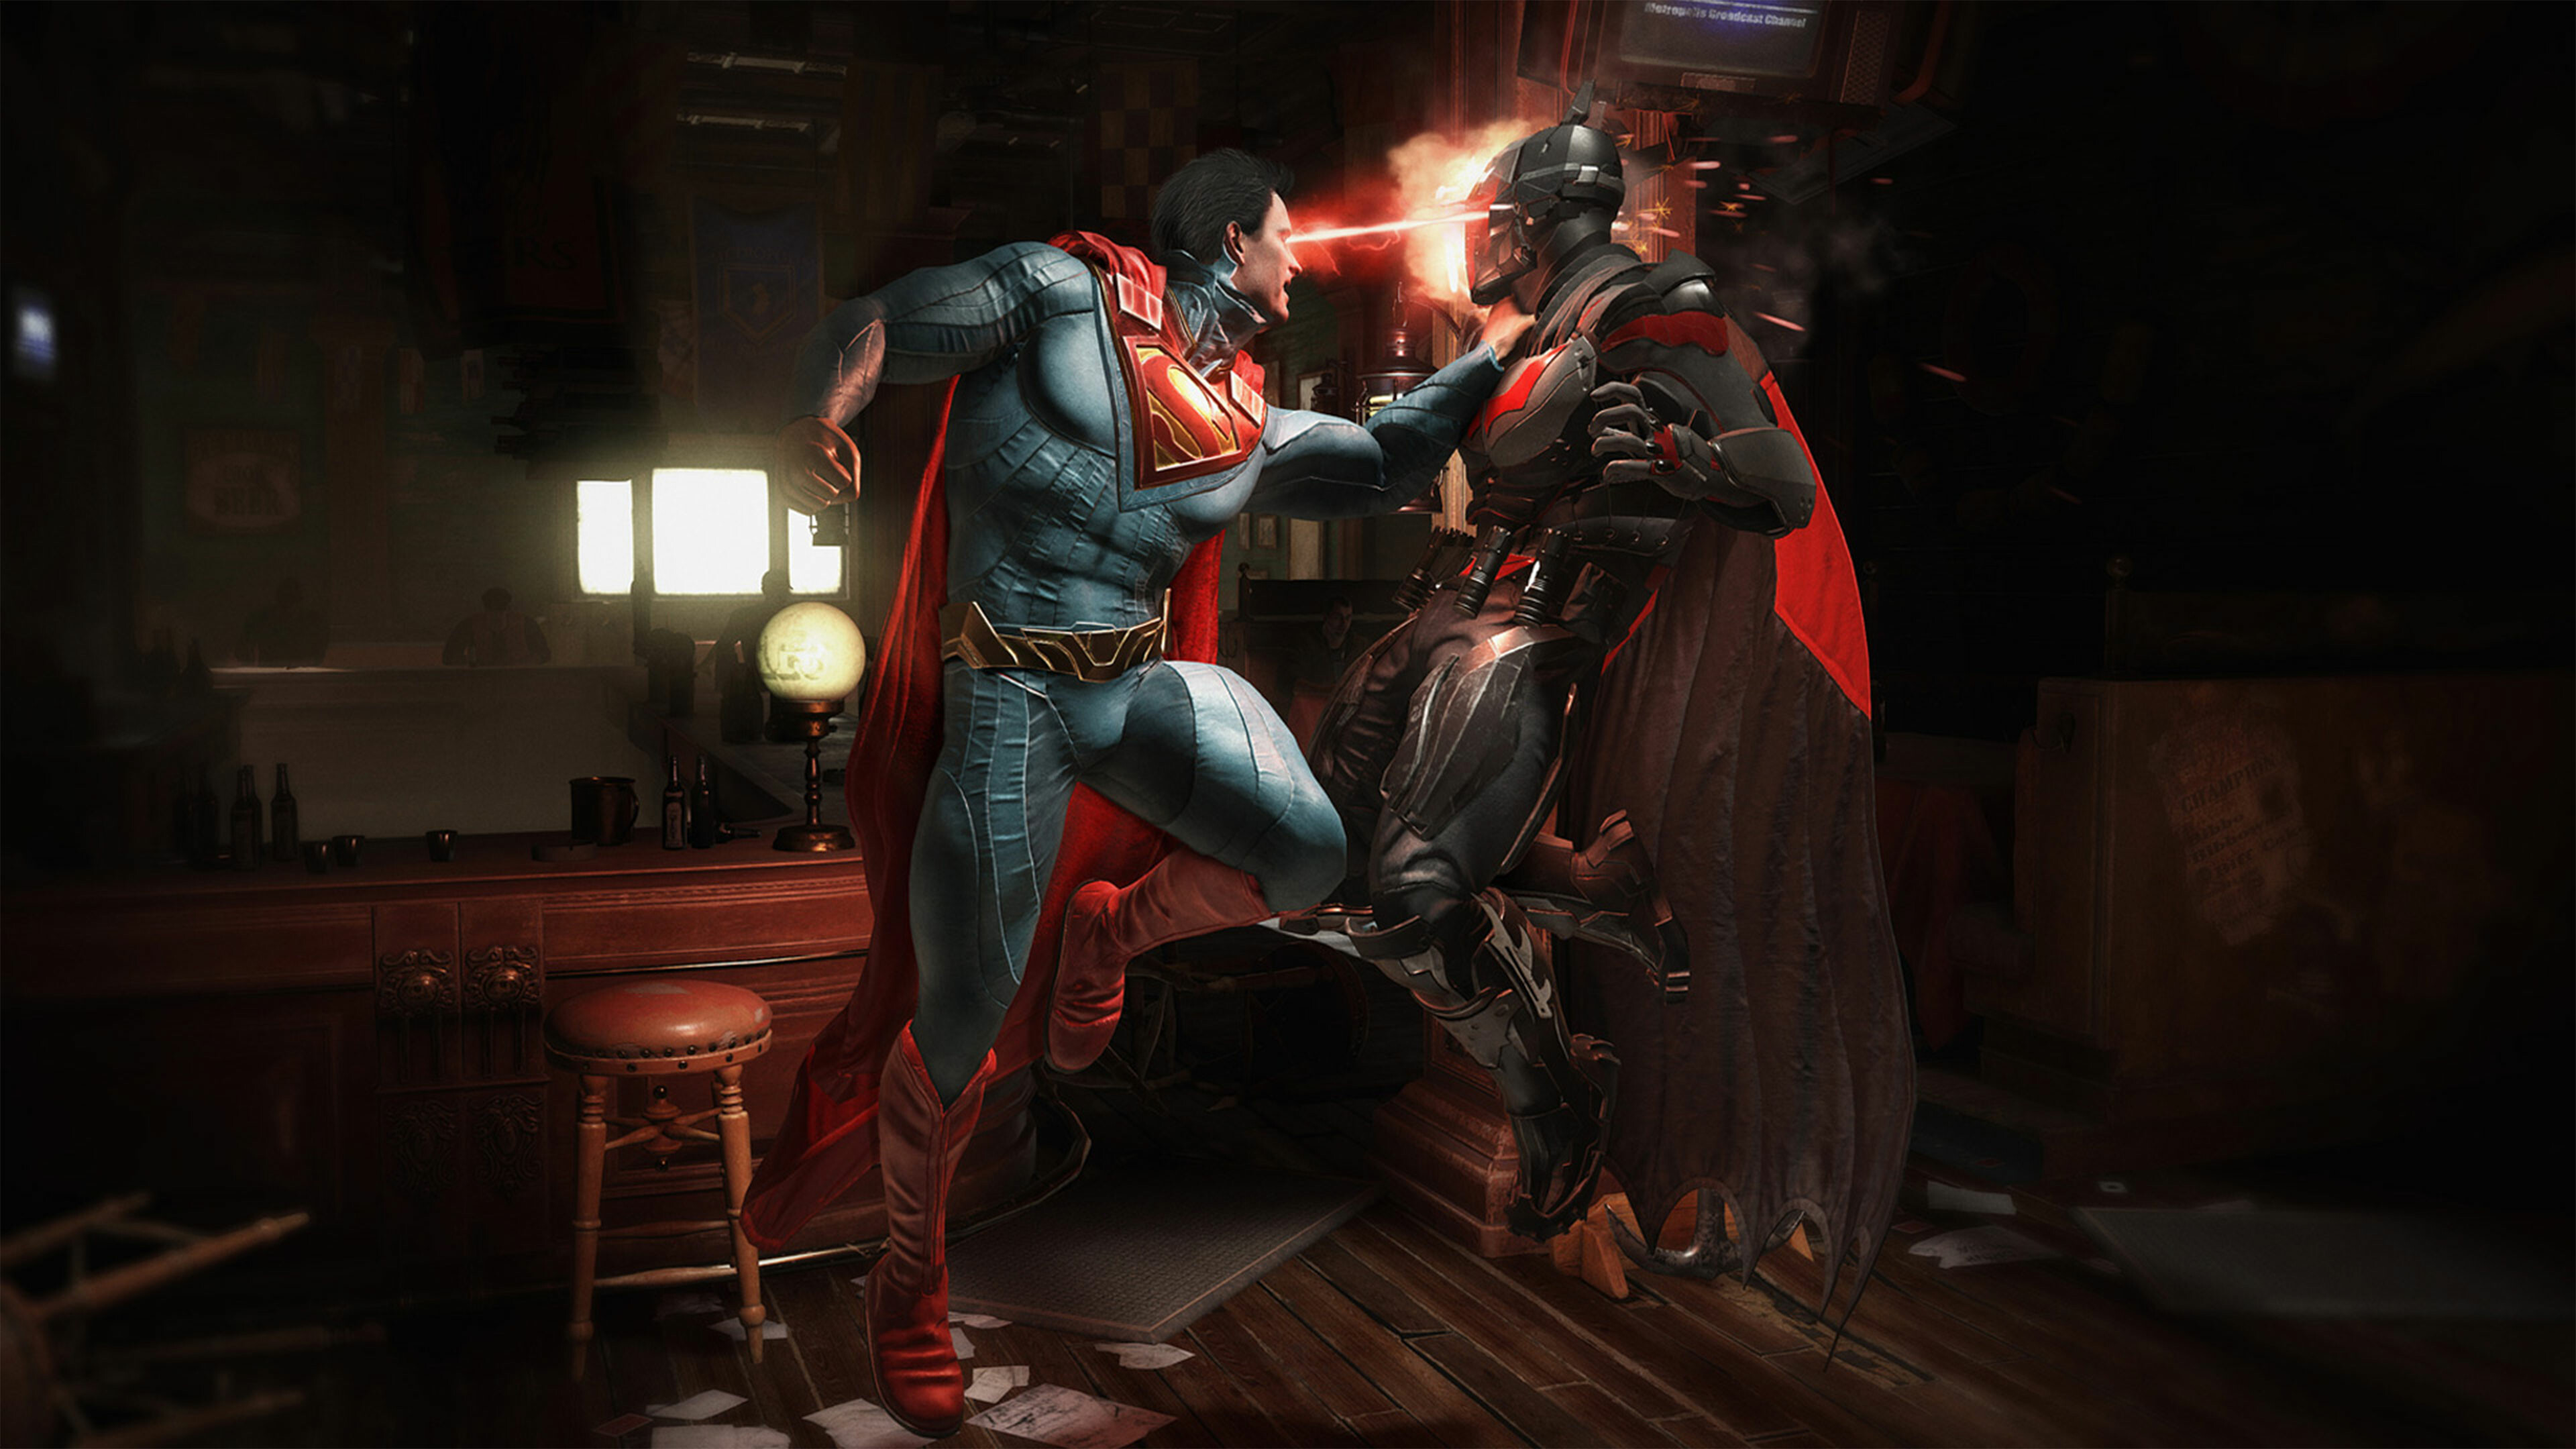 Injustice: The game featuring characters from the DC Comics universe. 3840x2160 4K Wallpaper.